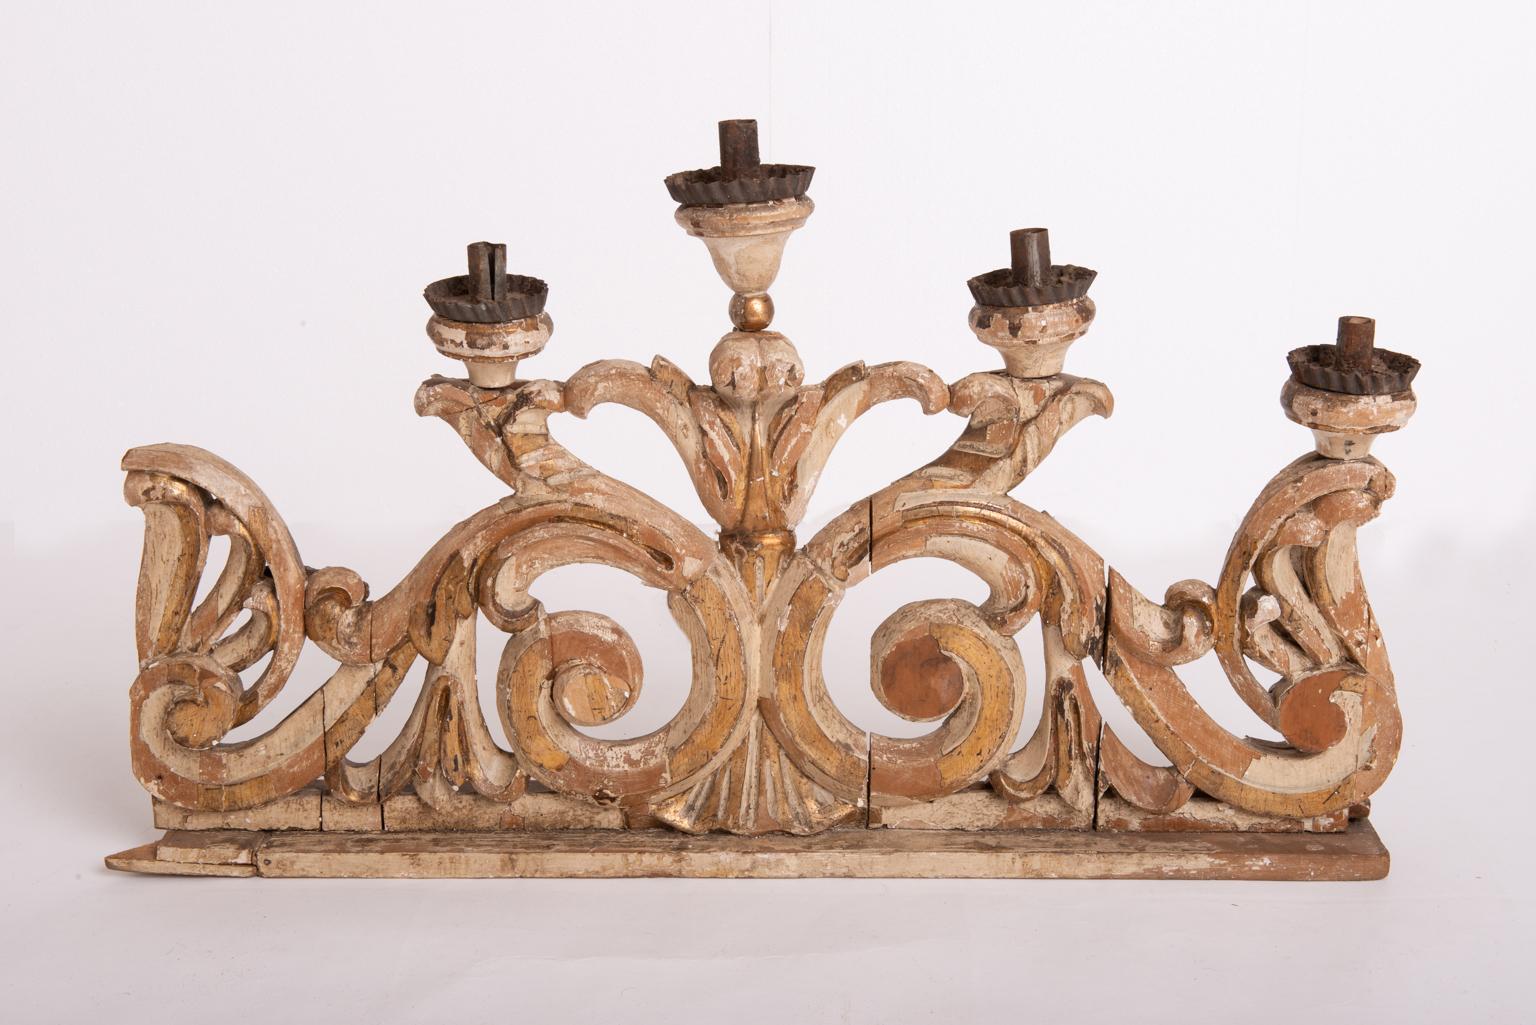 A rare pair of antique large wooden candleholders named 